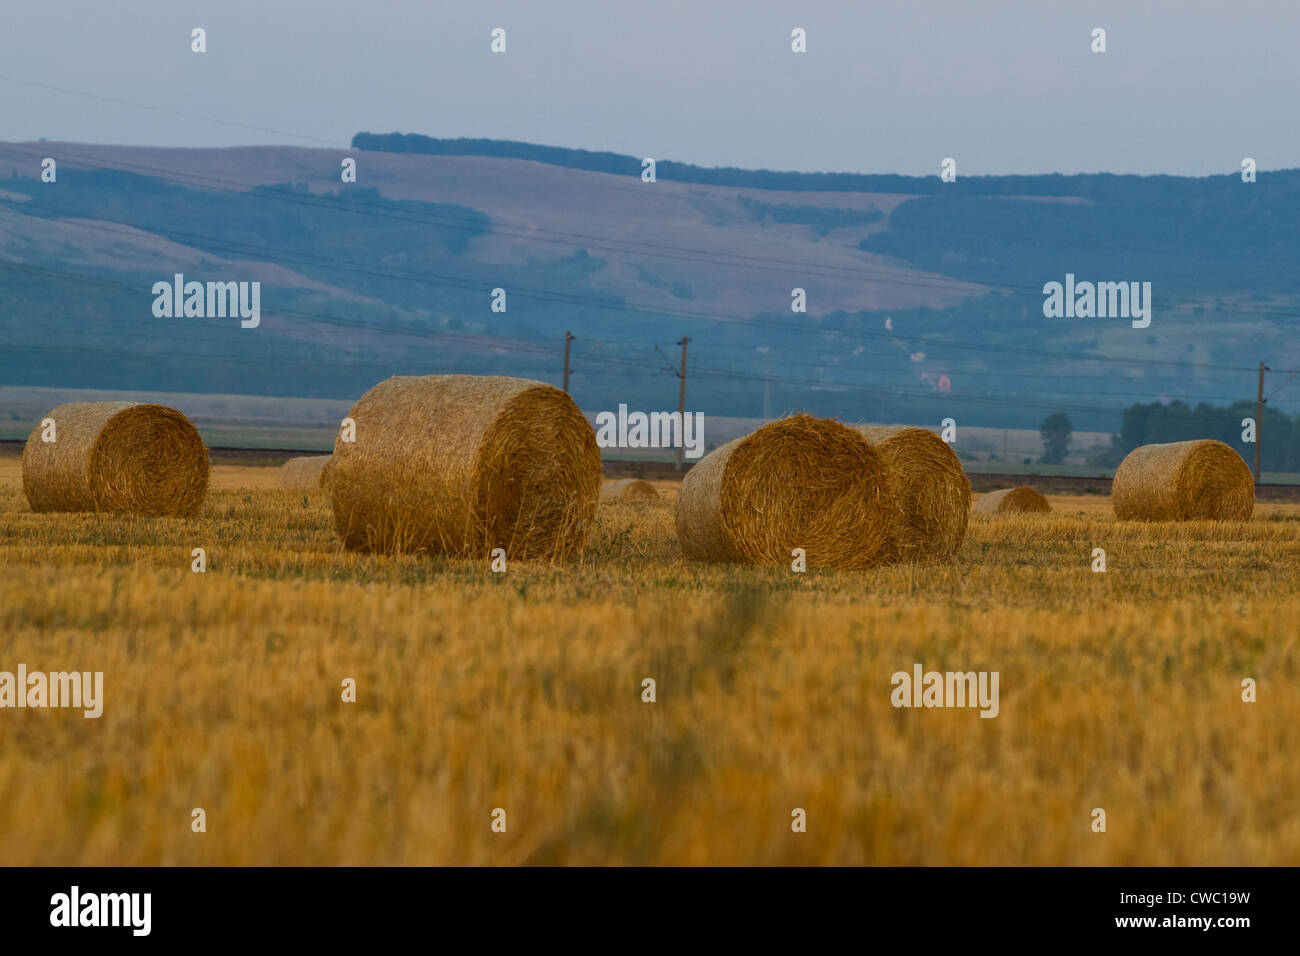 Field with bales of wheat straws (Triticum spa) at sunset Stock Photo